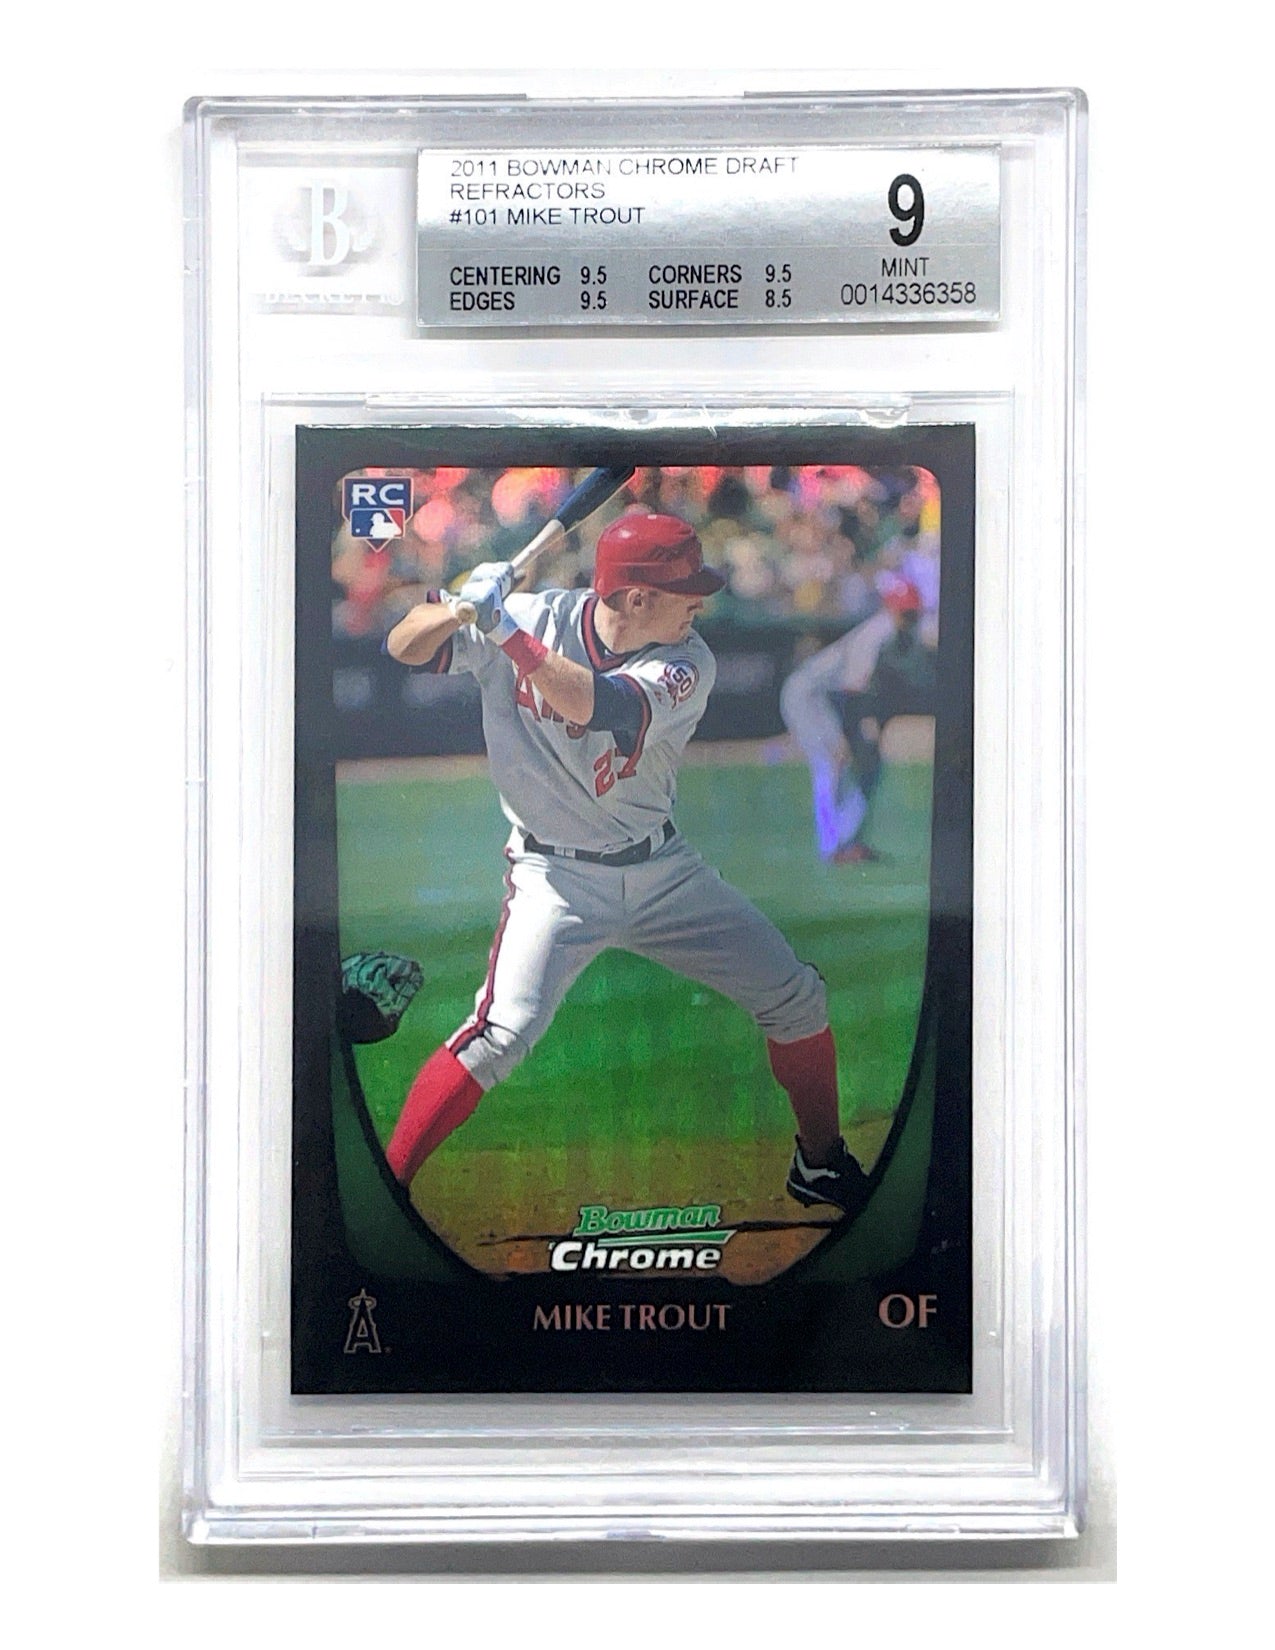 Mike Trout 2011 Bowman Chrome Draft Refractor Black Rookie #101 - BGS 9